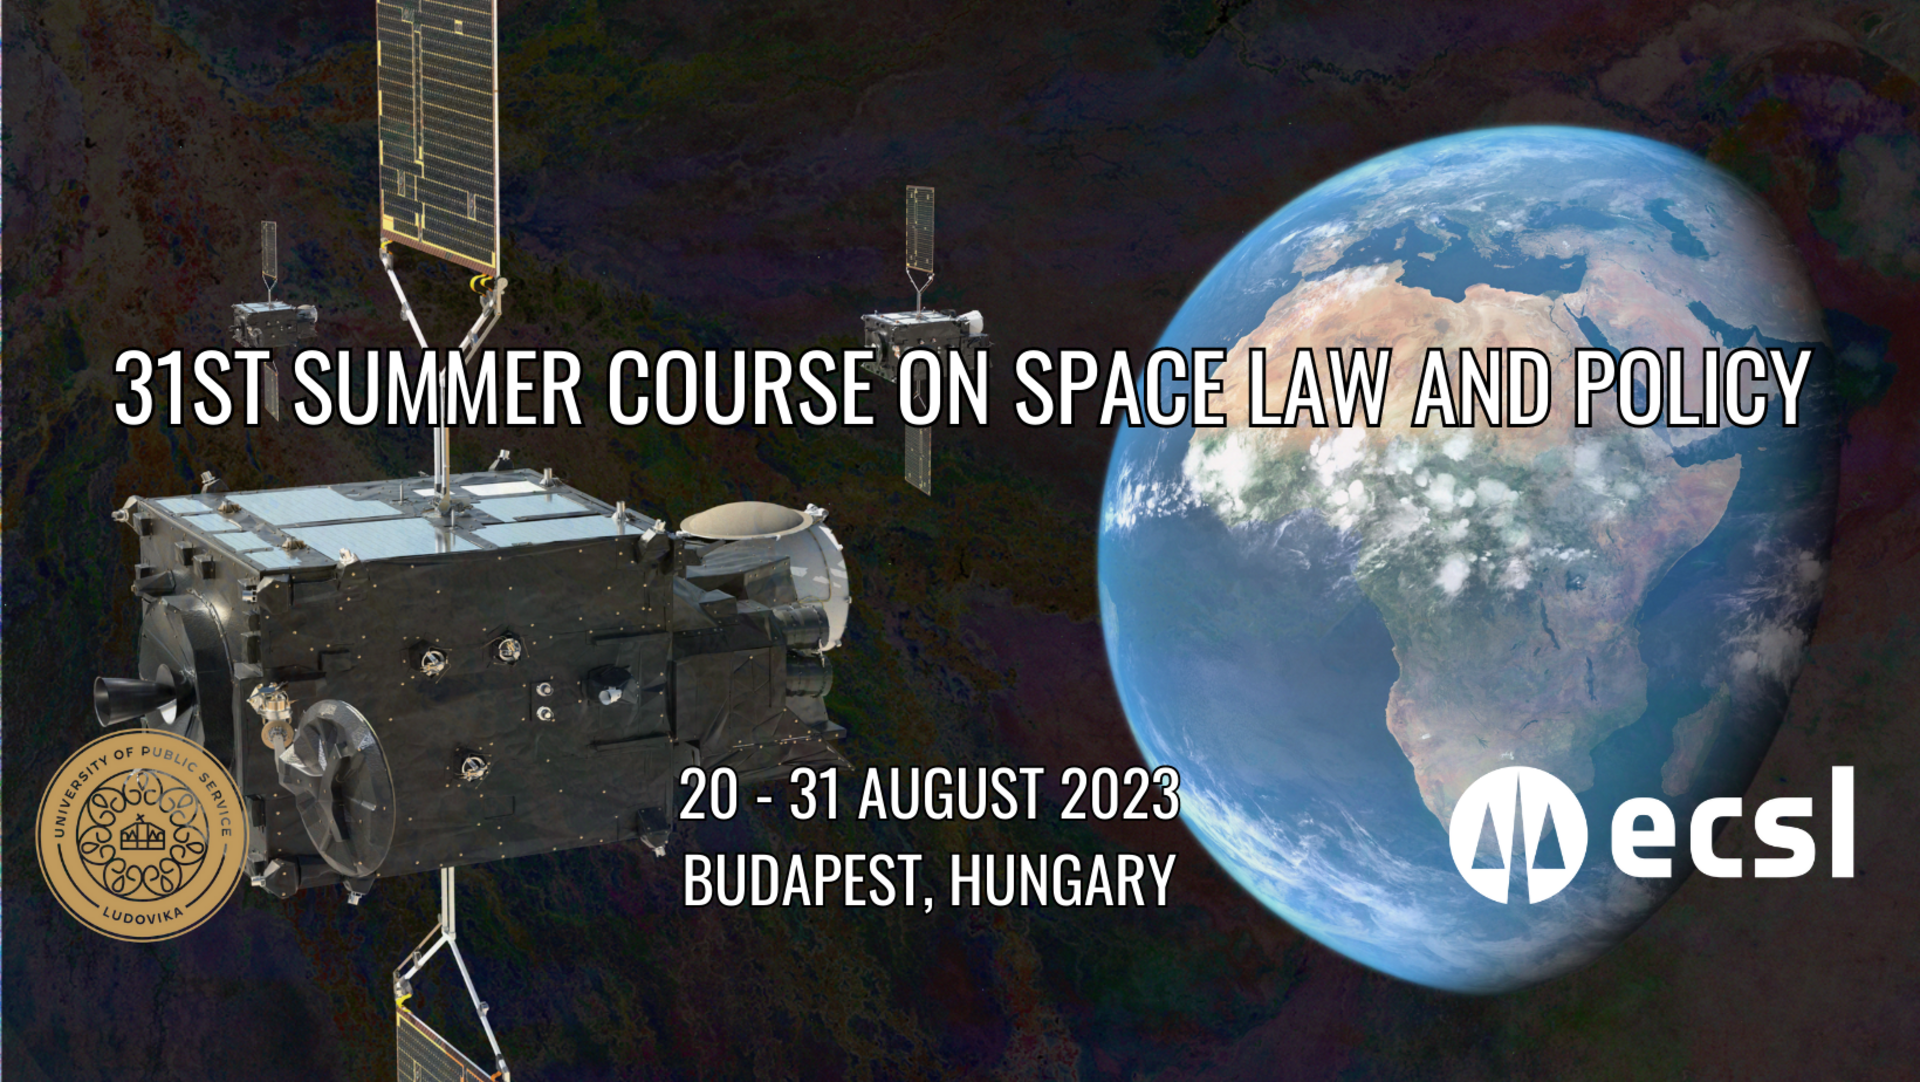 ESA/ECSL Summer Course on Space Law and Policy 2023 